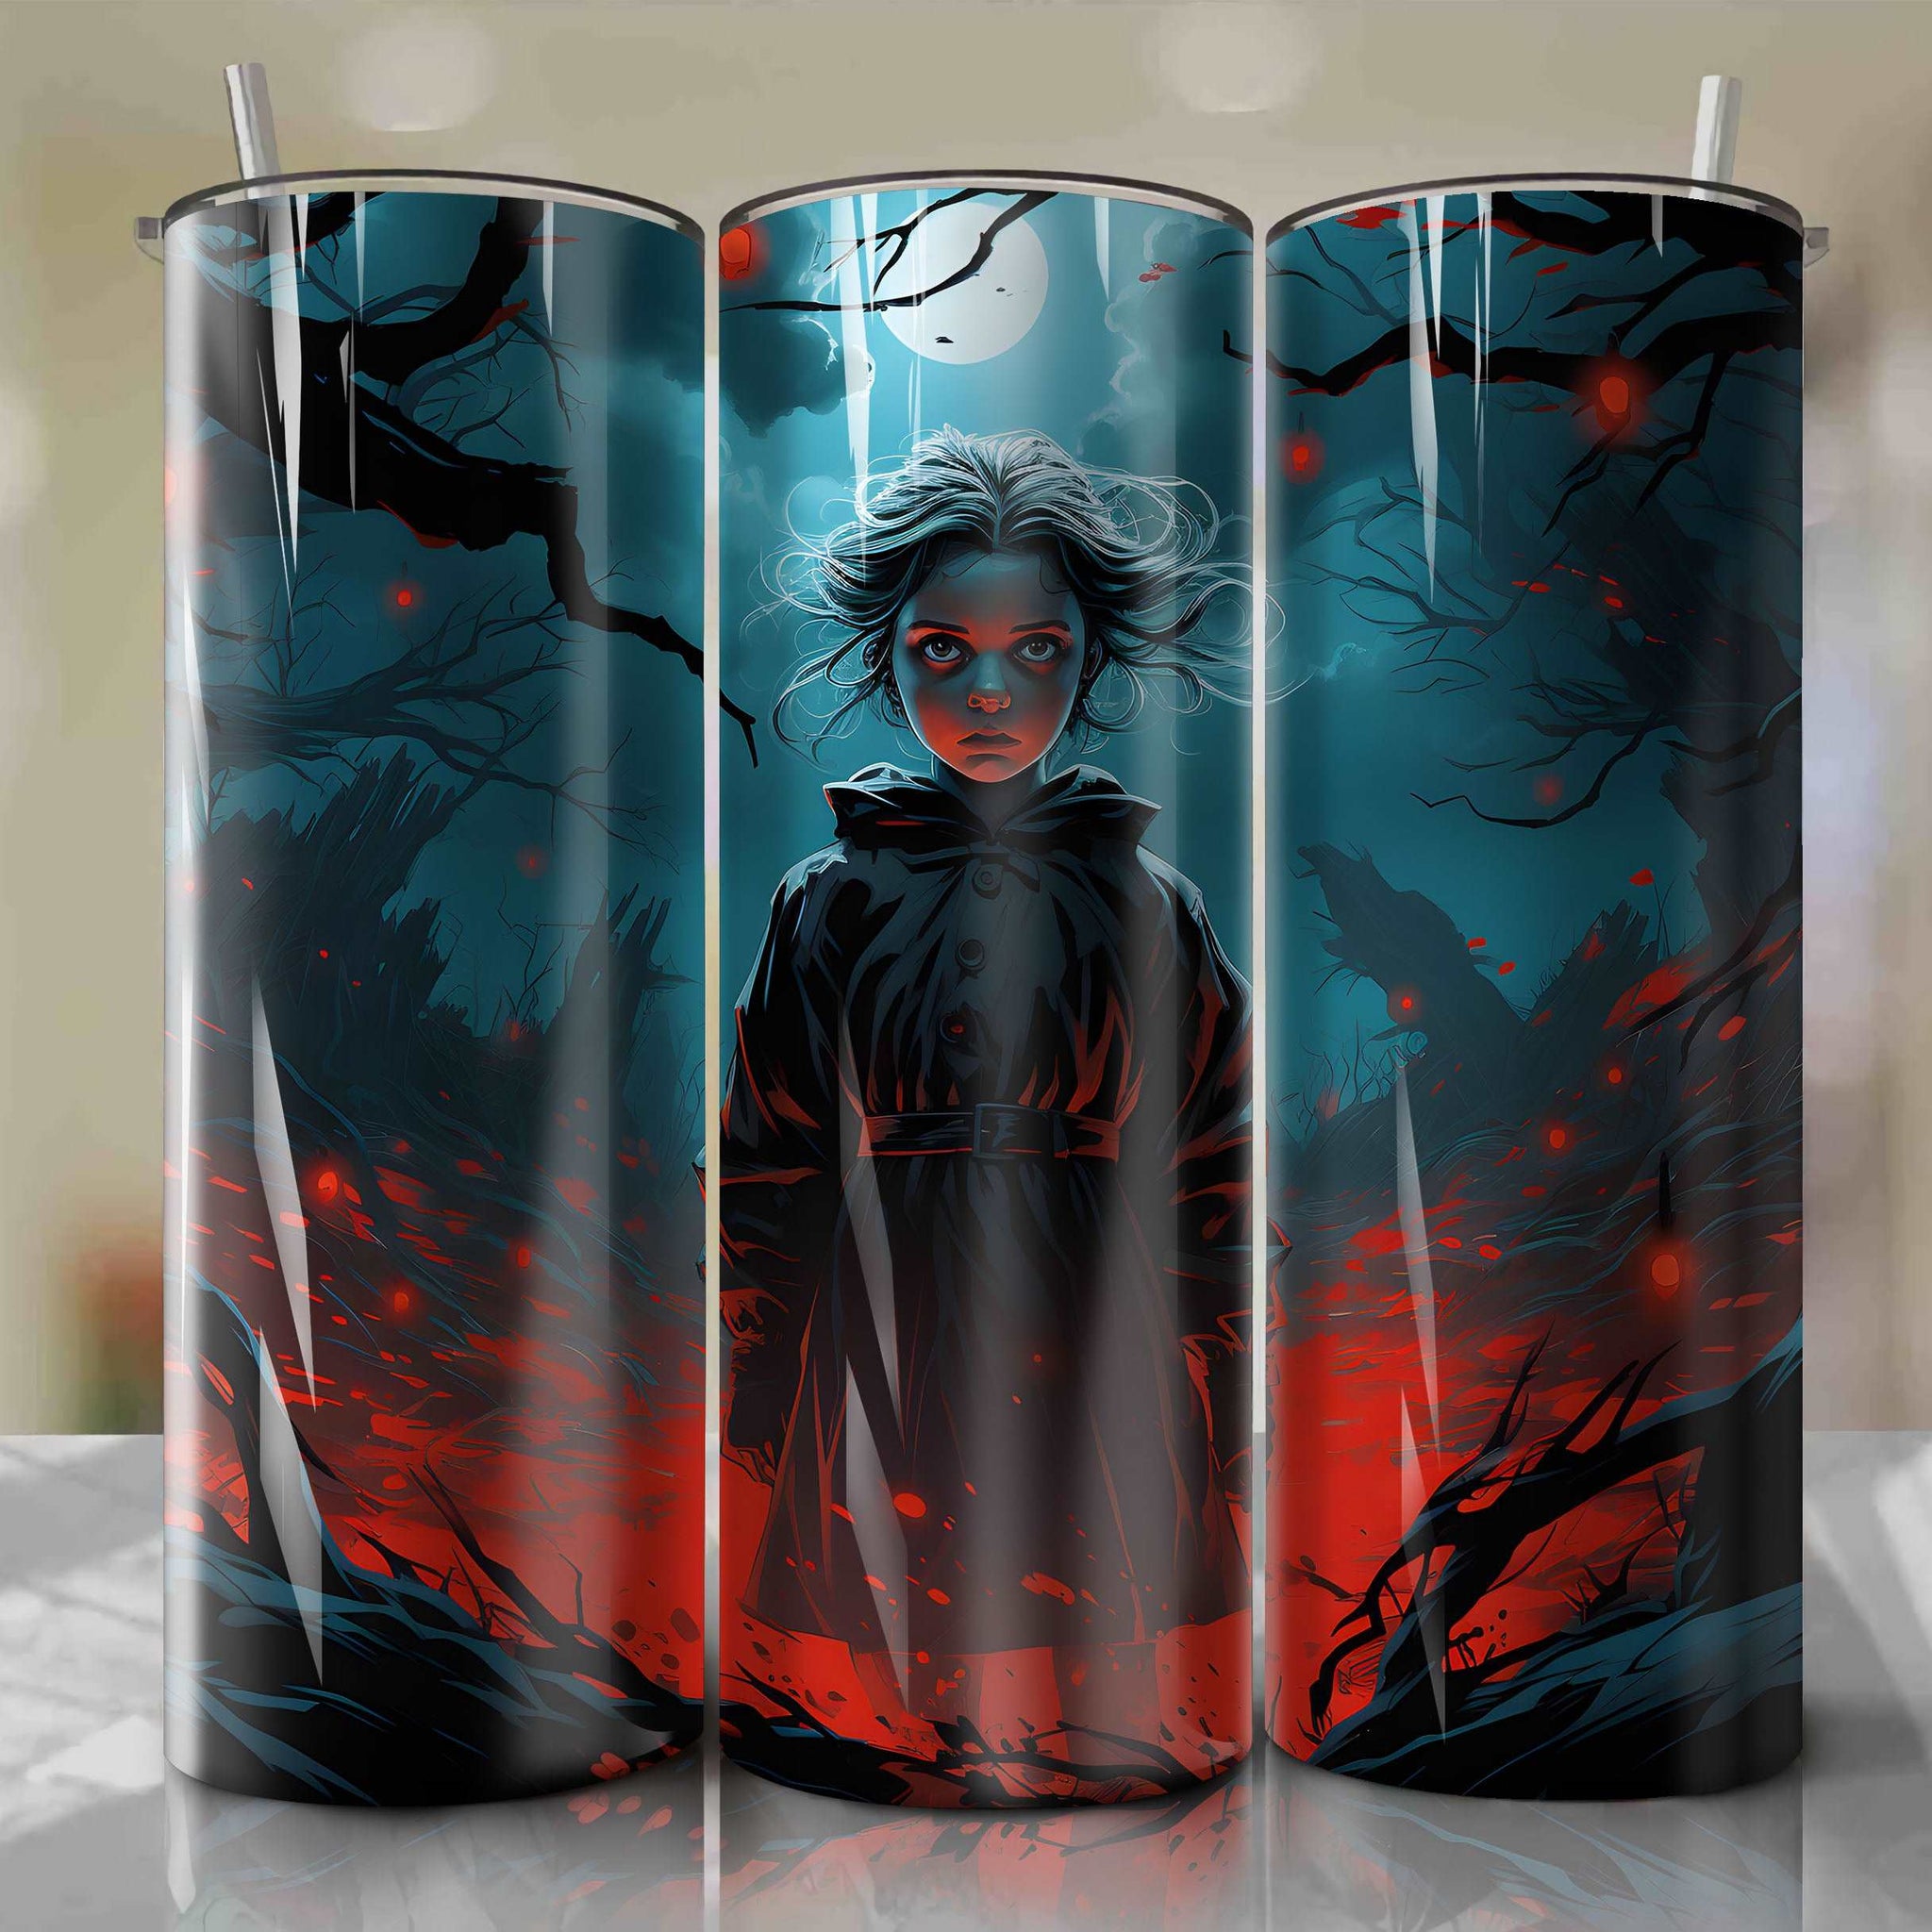 20 oz straight tumbler wrap for chilling, puritanical New England landscape with ominous surroundings featuring innocent face